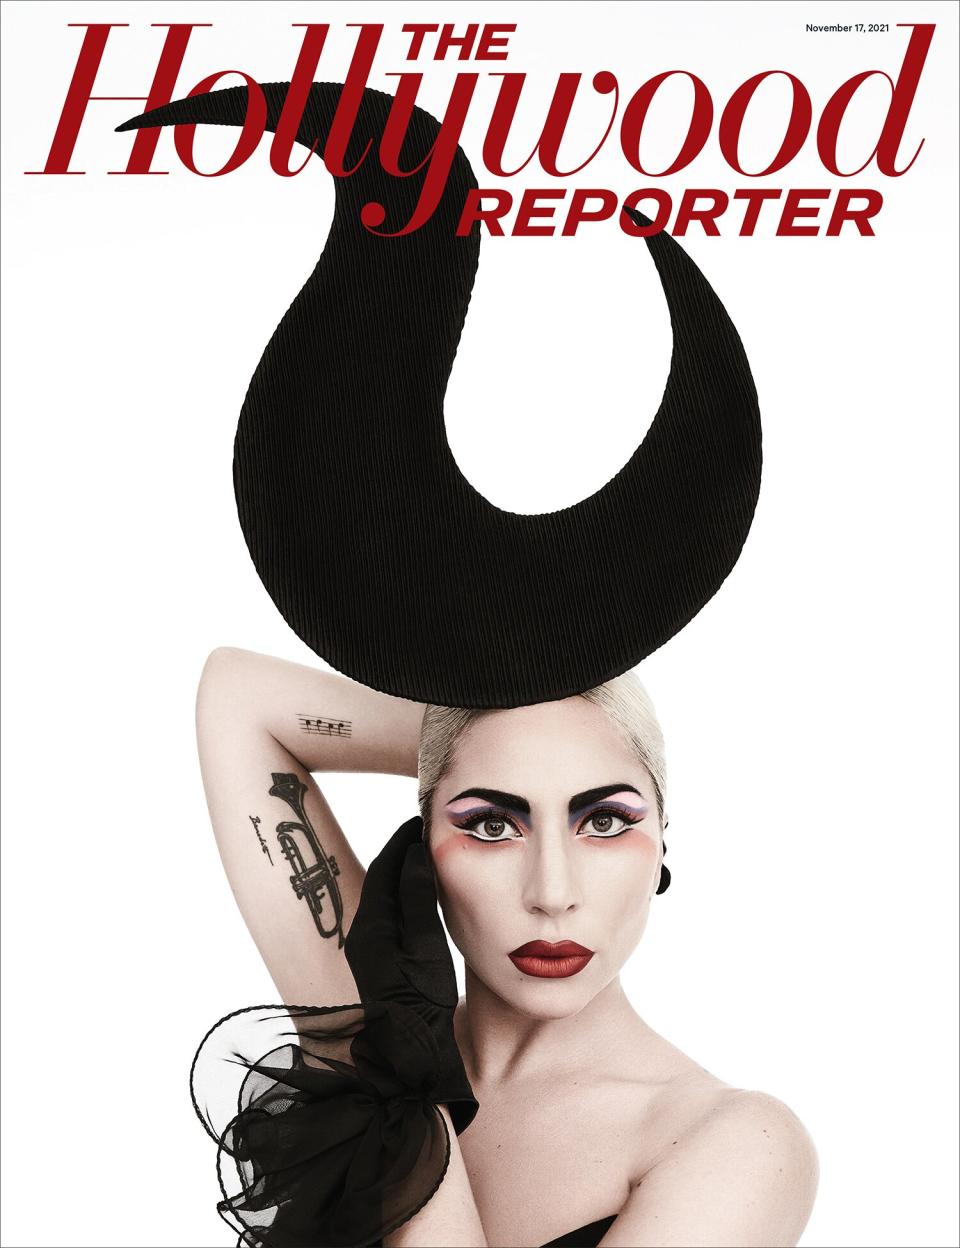 Lady Gaga for The Hollywood Reporter